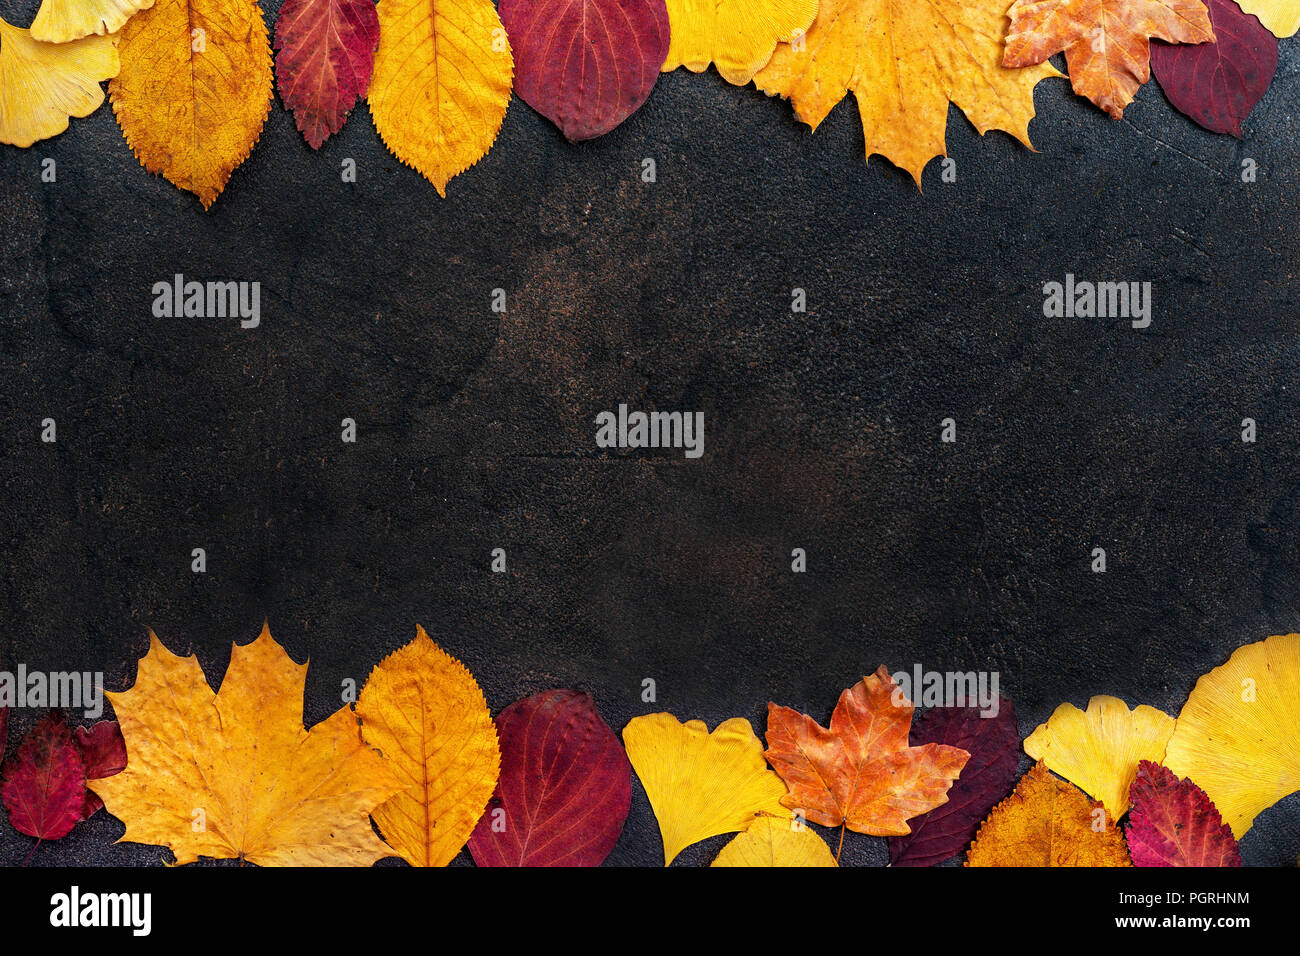 Top view of autumn leaves on dark background Stock Photo